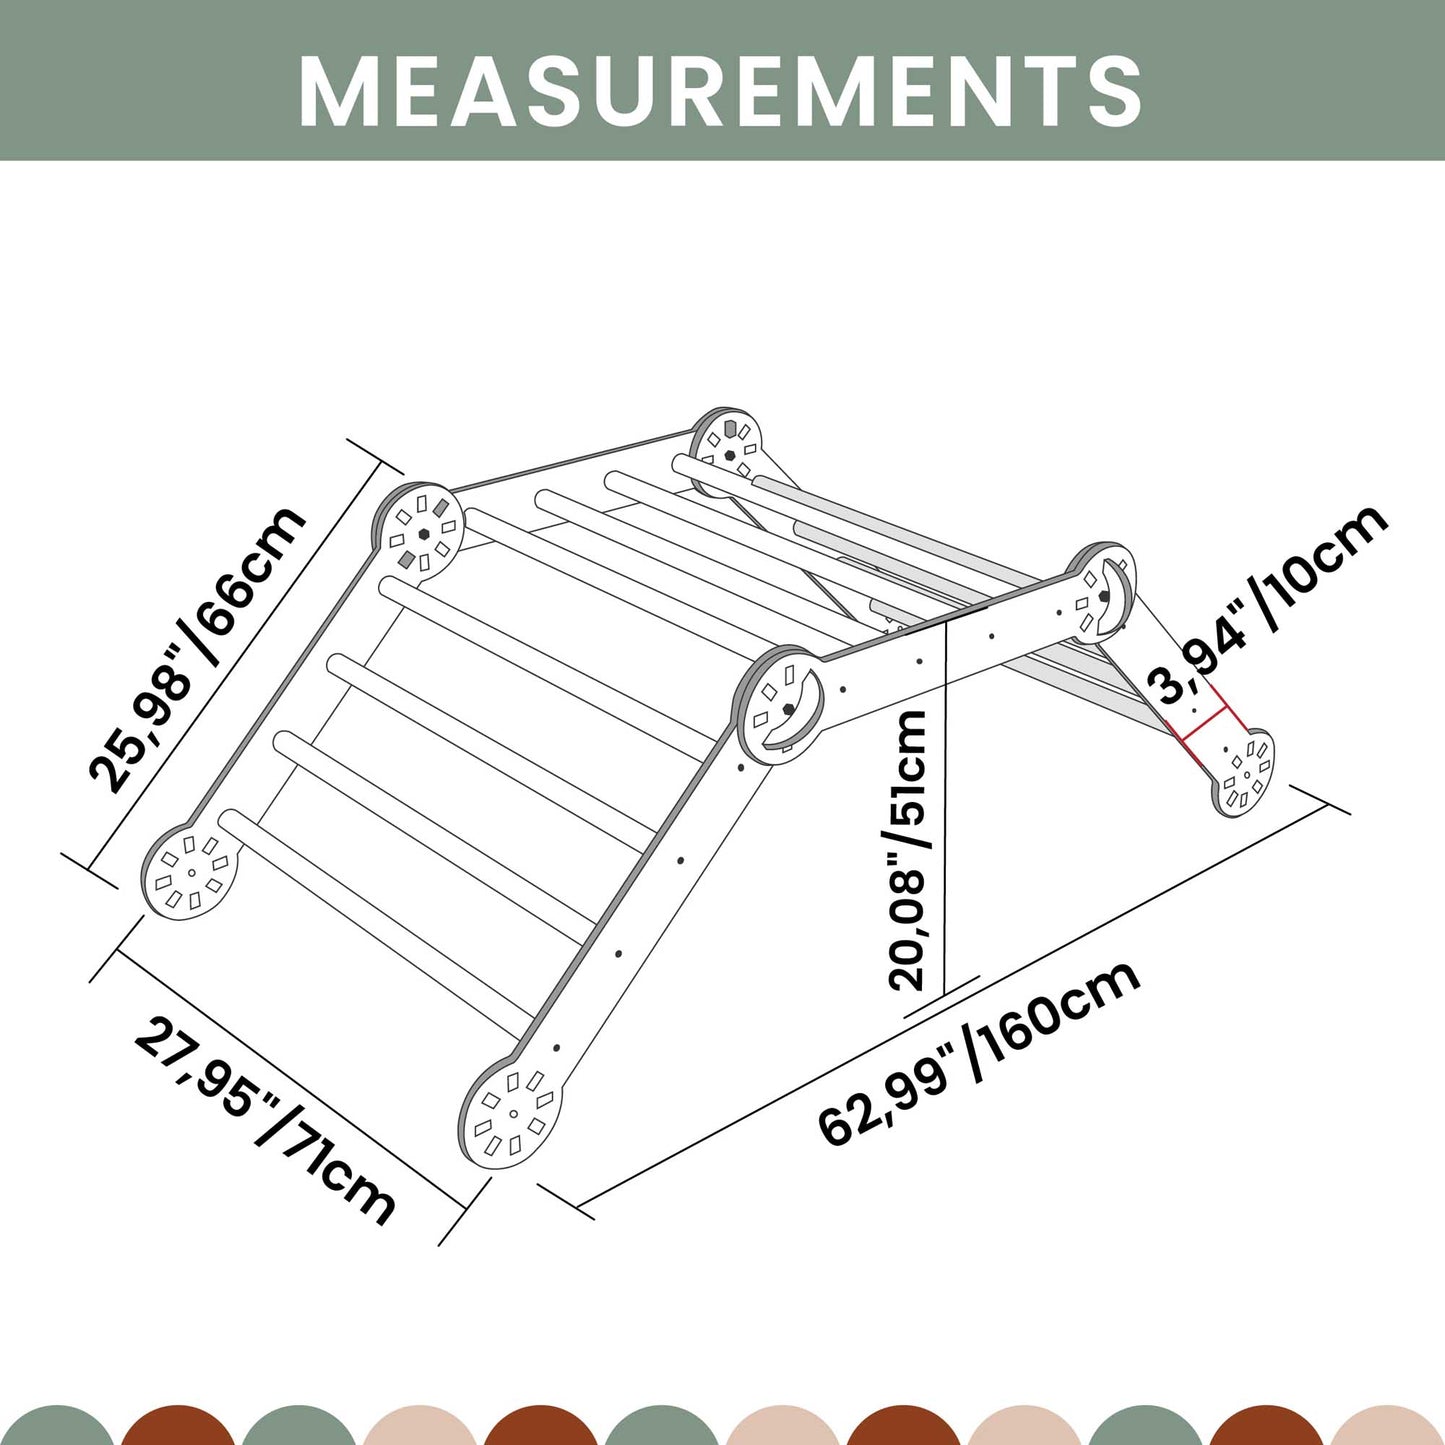 A diagram showing the measurements of a wooden ladder, Transformable climbing gym.